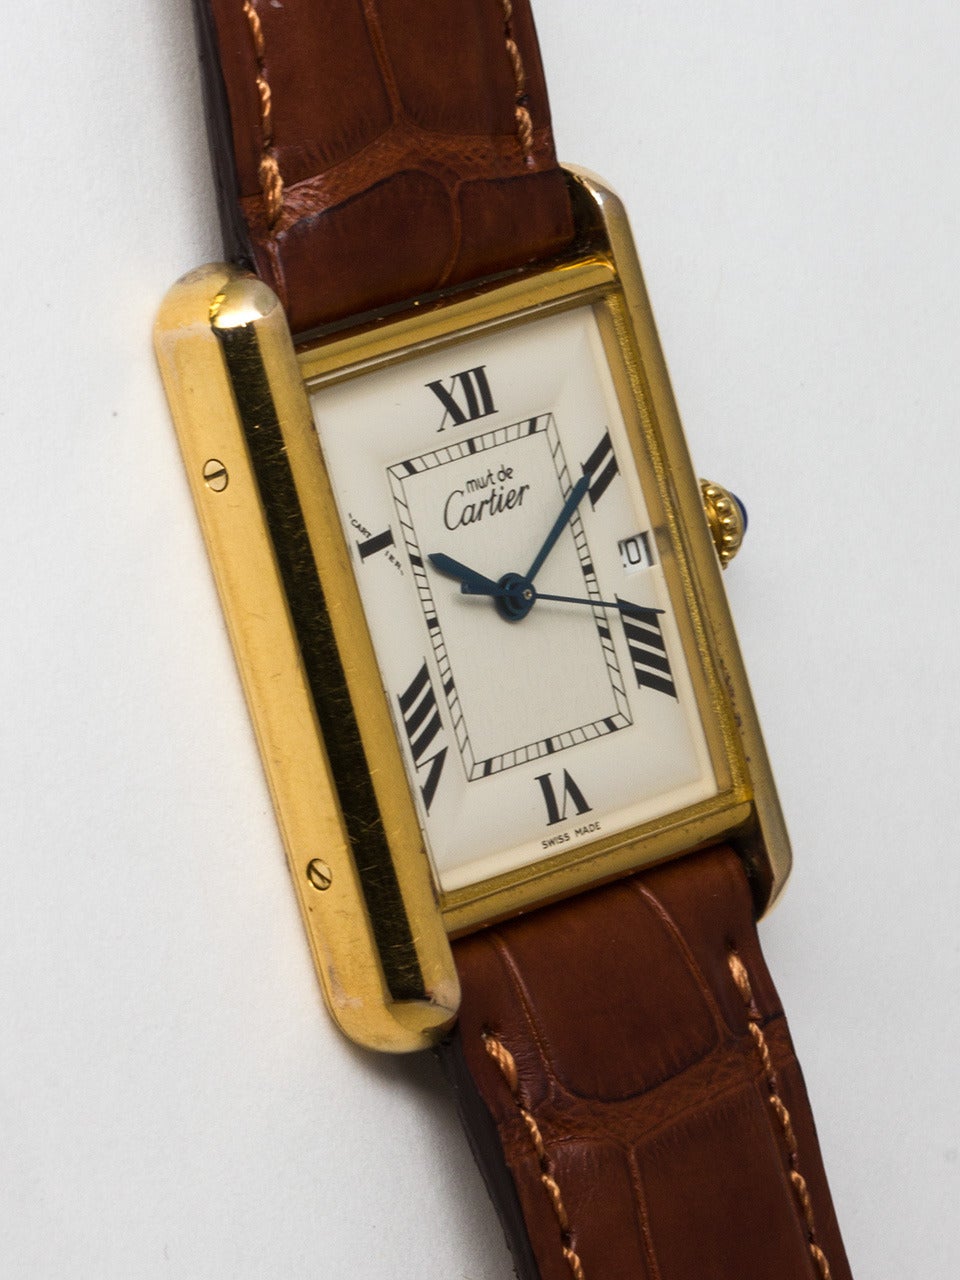 Cartier Man's Vermeil Tank Louis Must de Cartier Wristwatch, circa 2000s. Vermeil, 20 microns gold over silver, larger size 26 x 34mm water resistant style case secured by 8 case back screws and blue cabochon sapphire crown. Off white dial signed